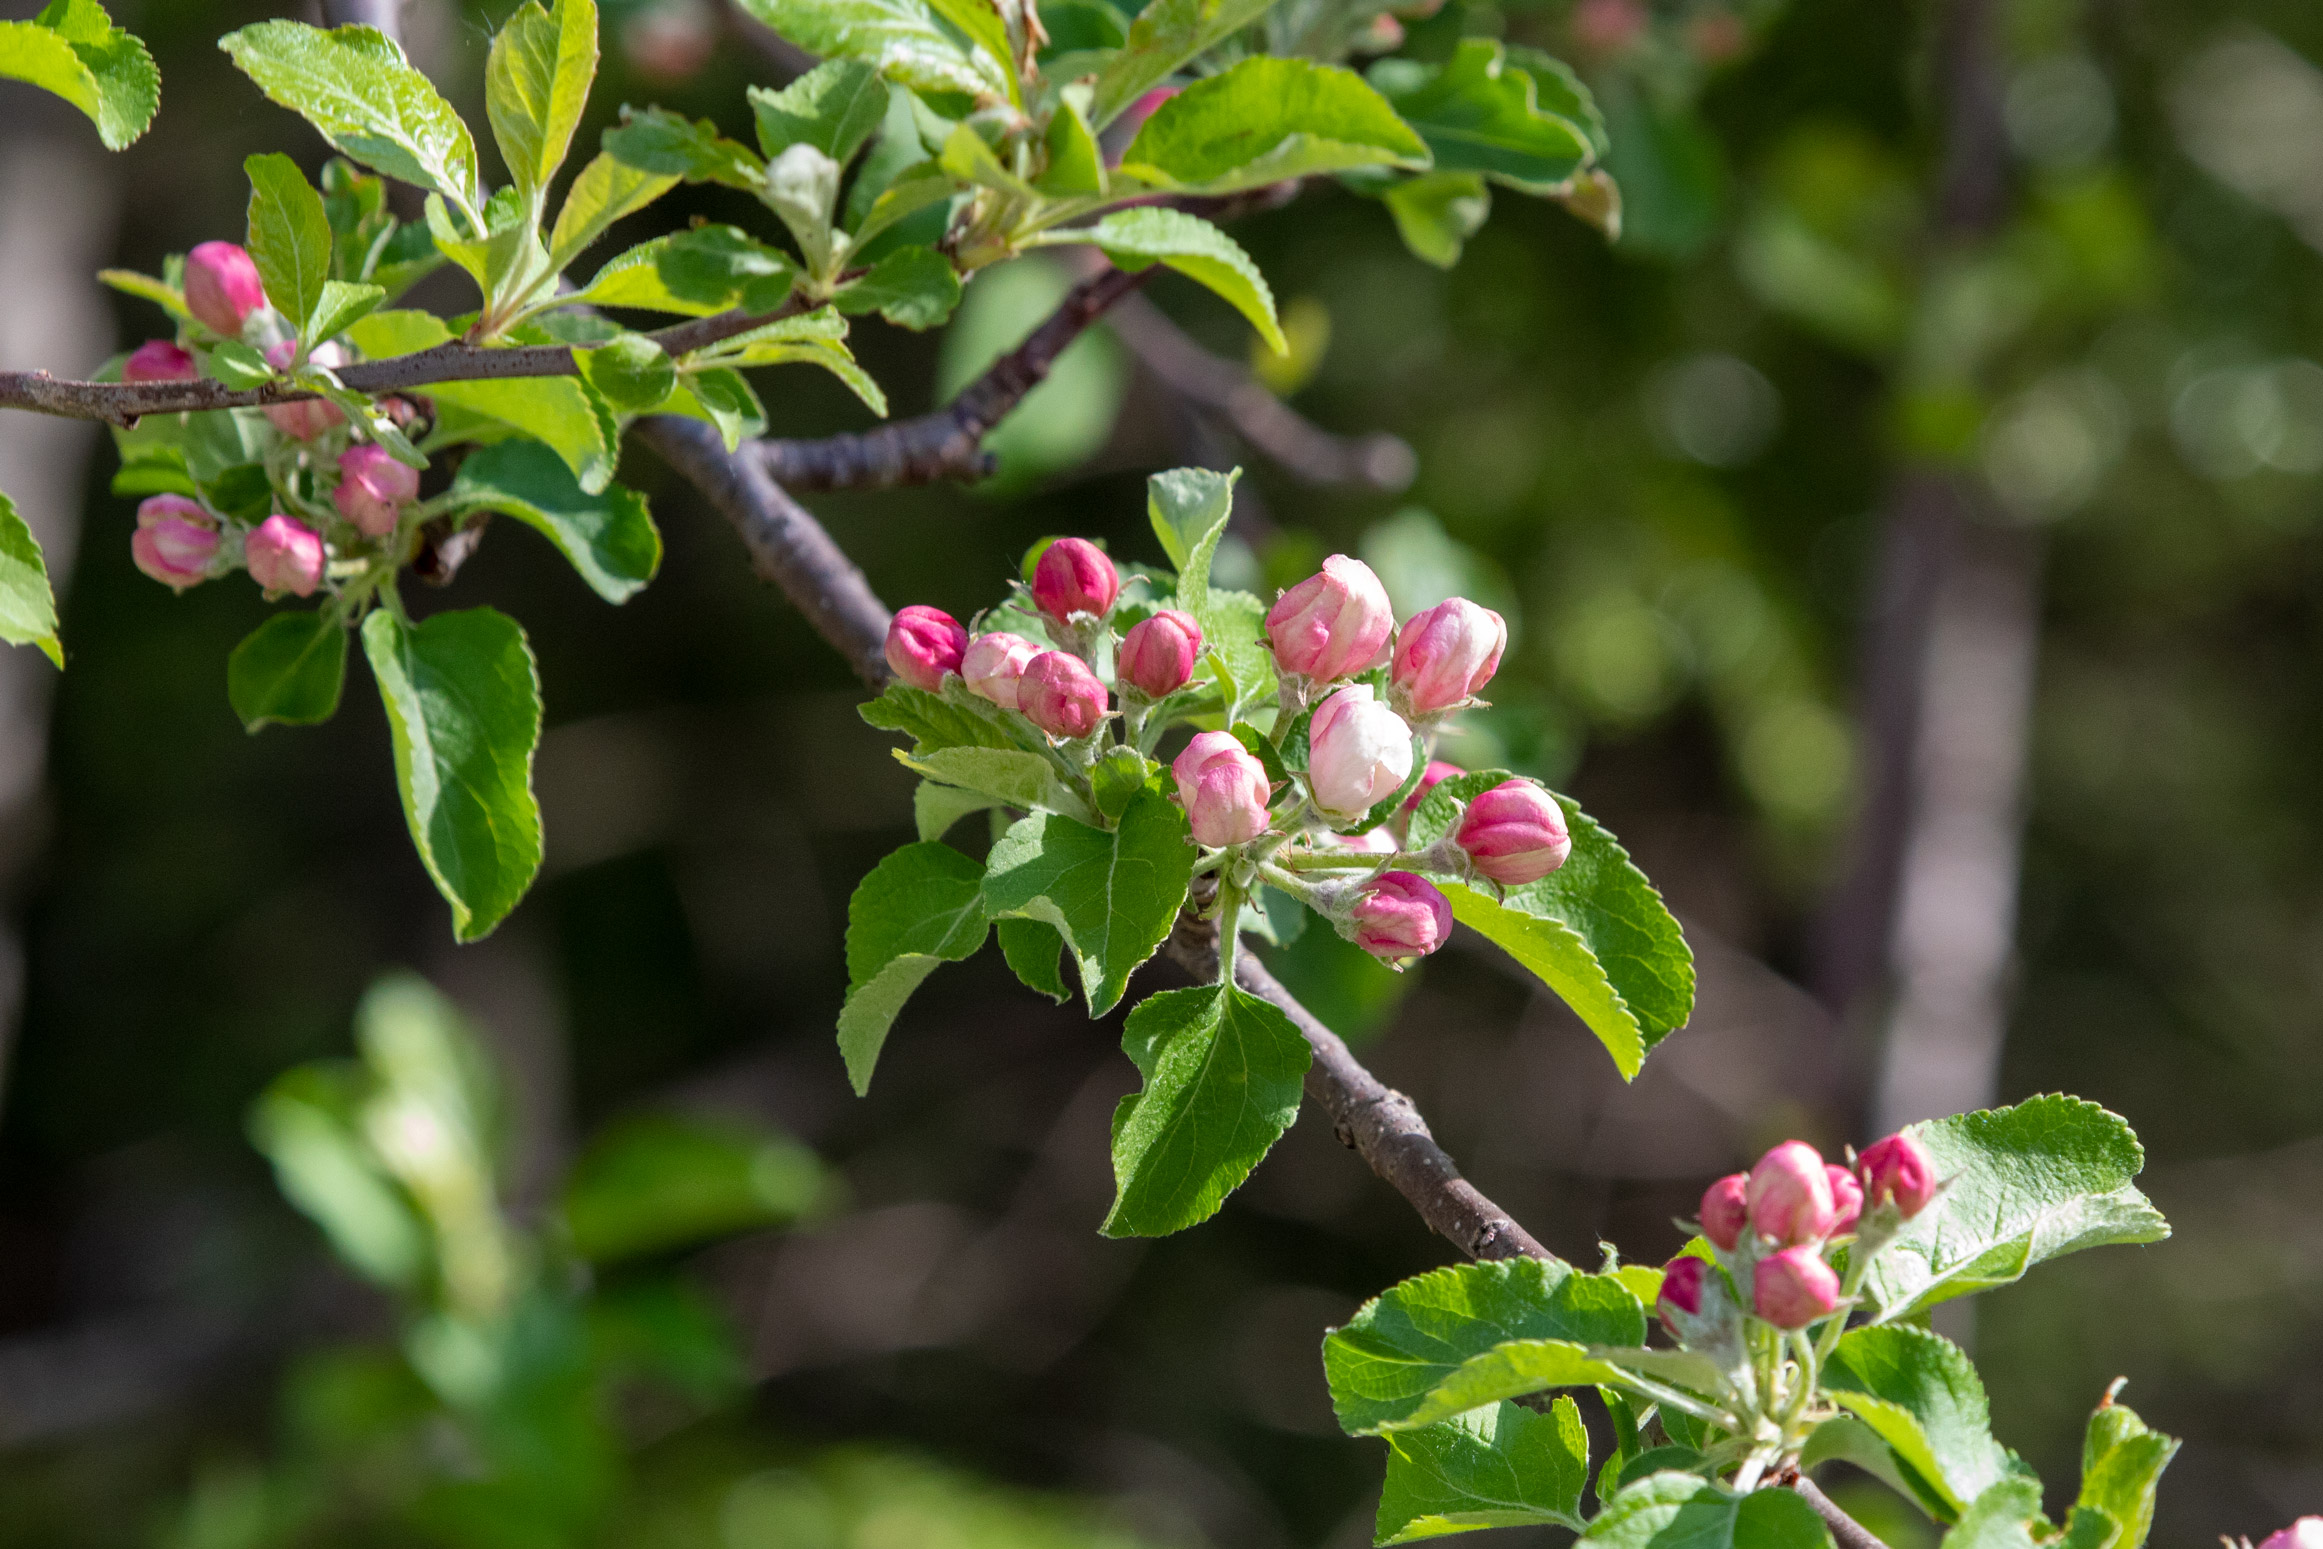 Small pink blossoms on a tree with green leaves